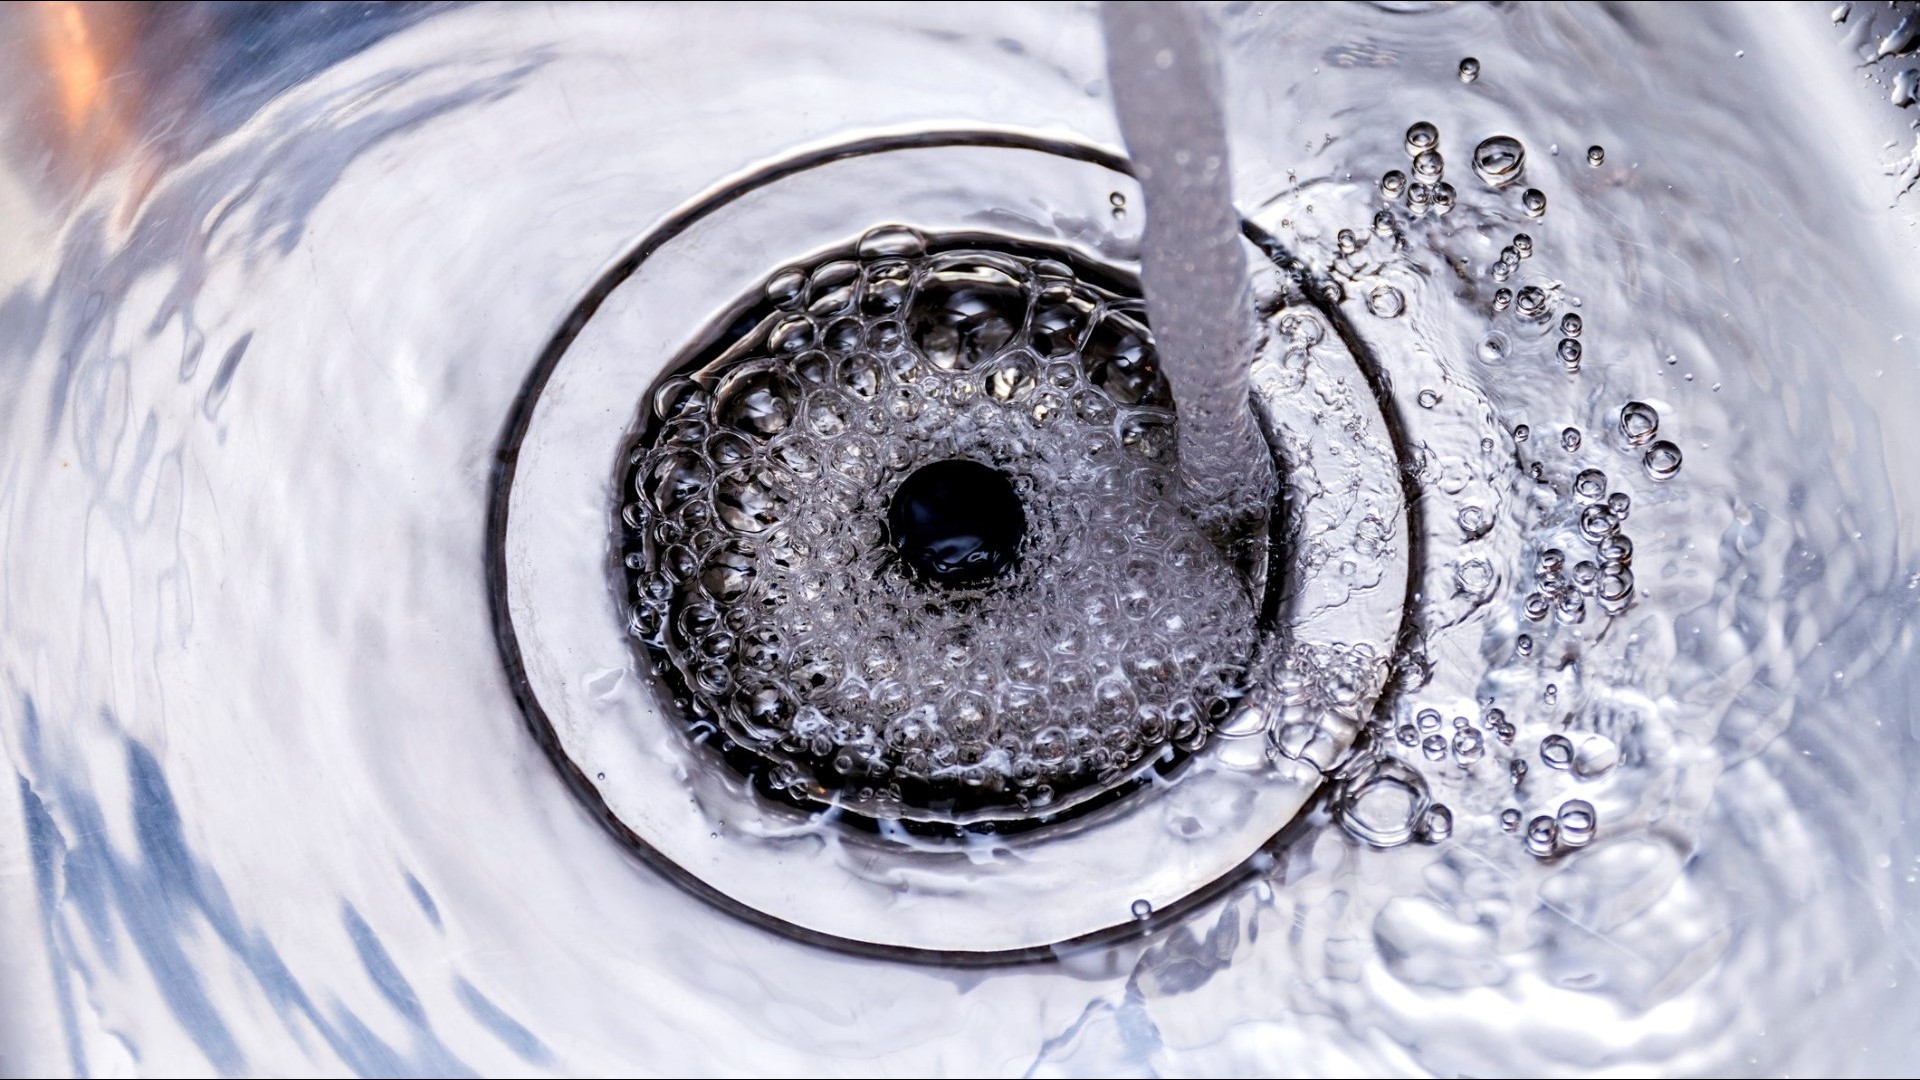 Though adding fluoride to drinking water is recommended by nearly all public health, medical, and dental organizations — it still doesn't sit well with some people.